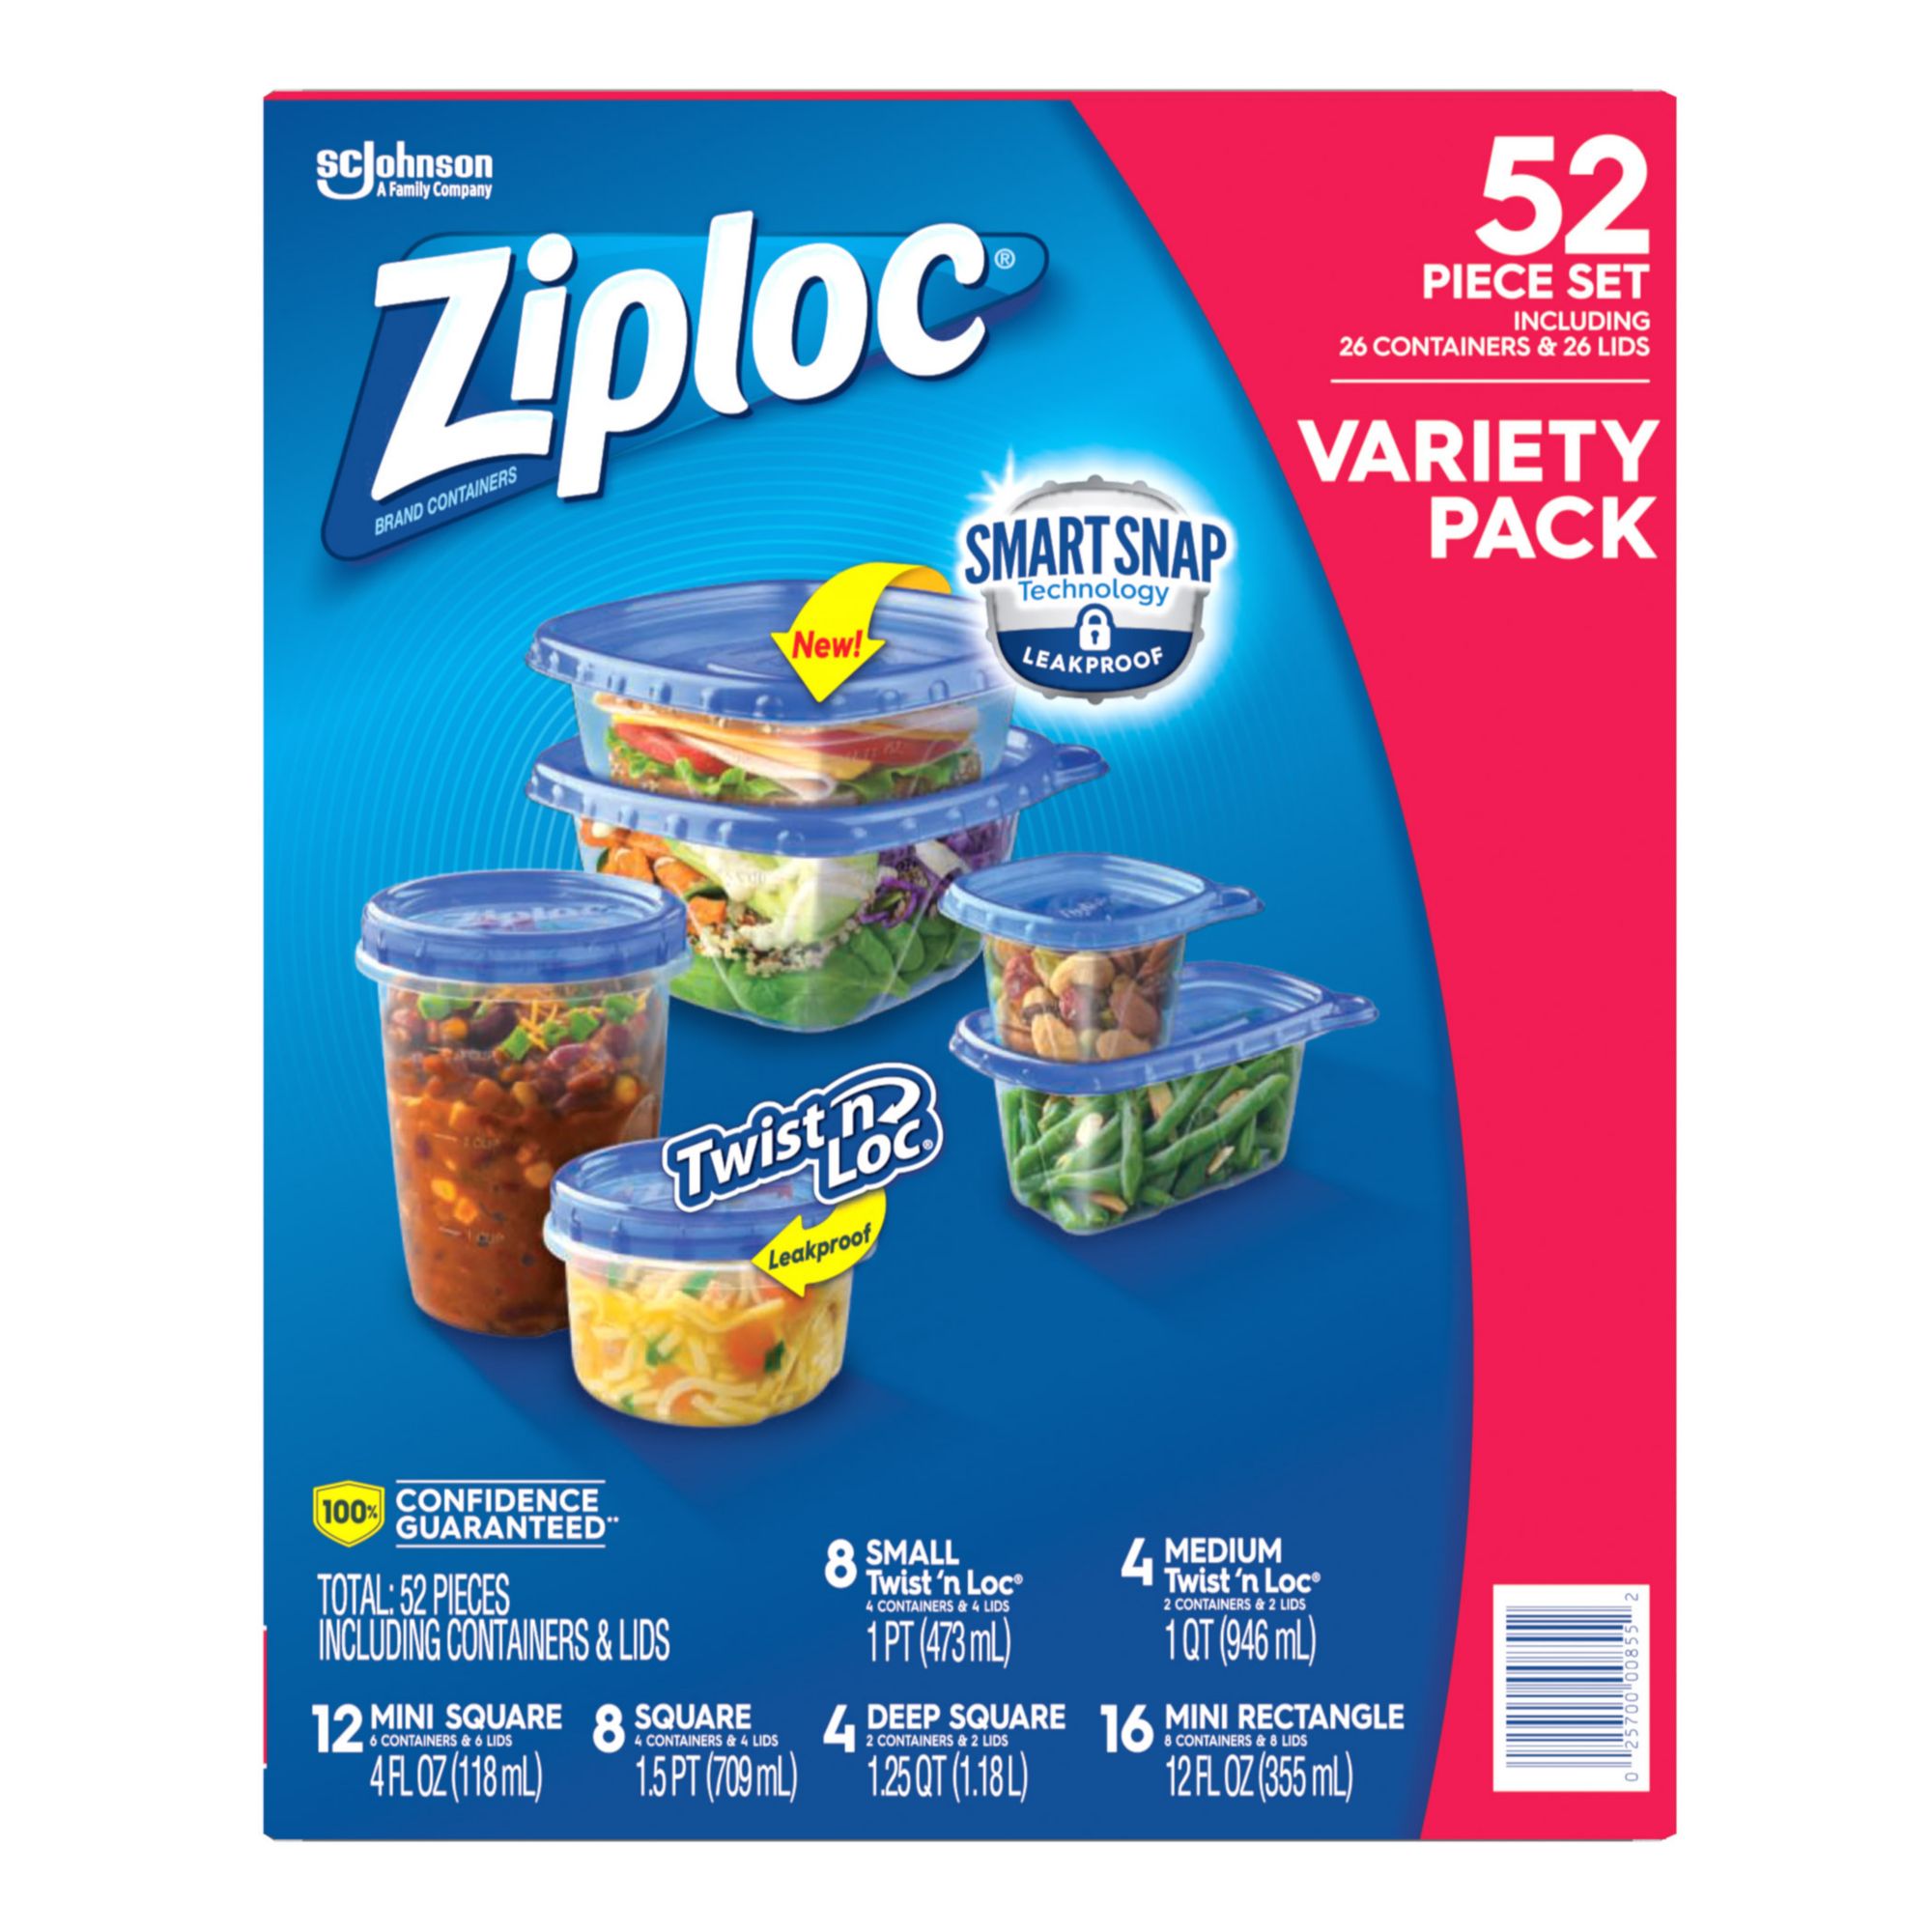 Ziploc Smart Snap Containers & Lids, Mini Square, 16 Ounce - 8 containers & lids